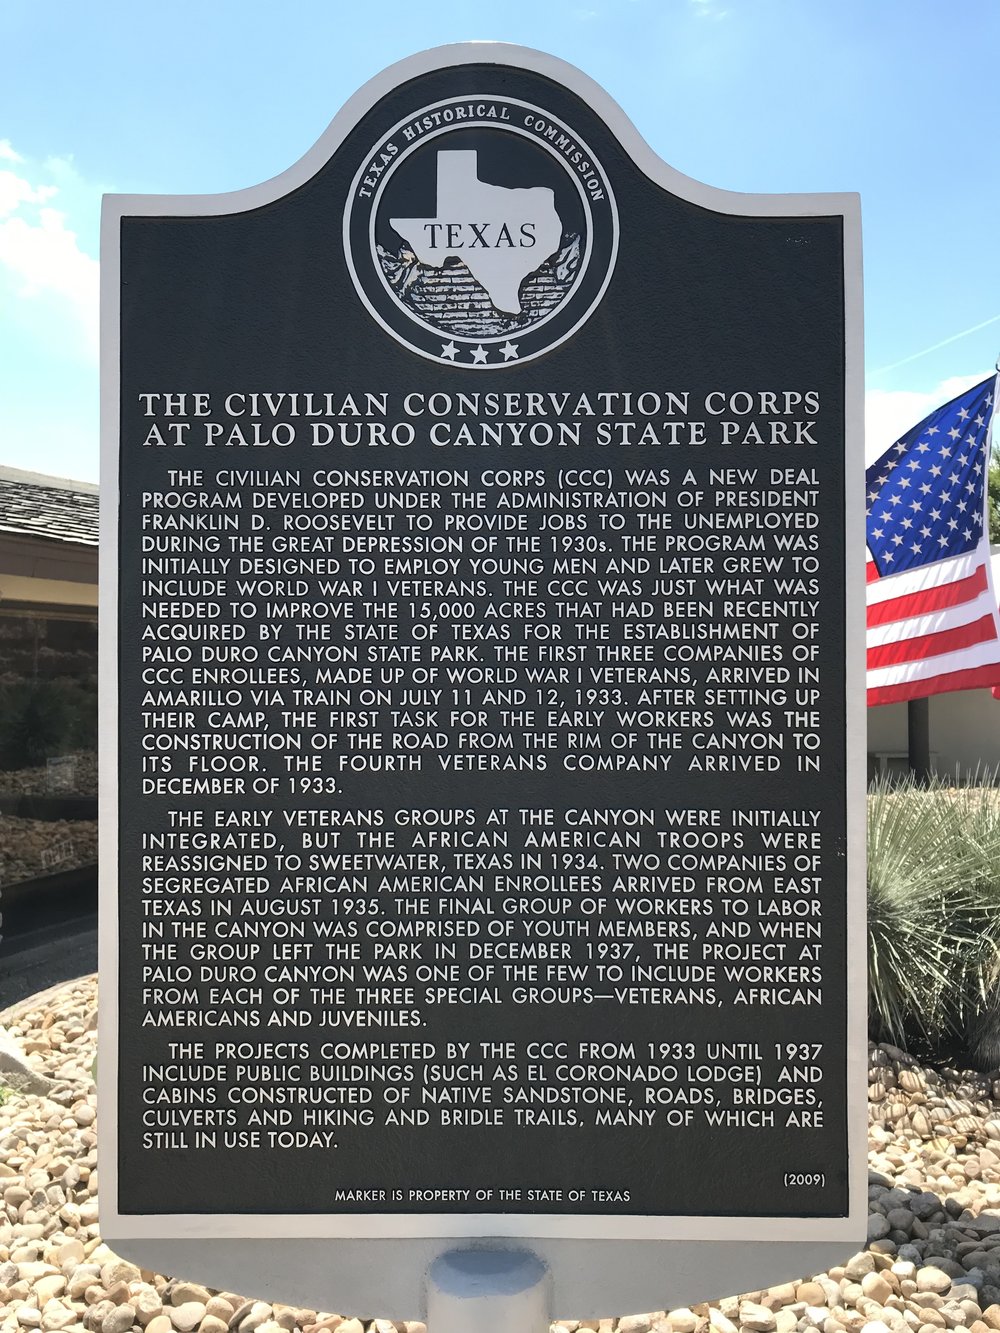 16005: The Civilian Conservation Corps at Palo Duro Canyon State Park